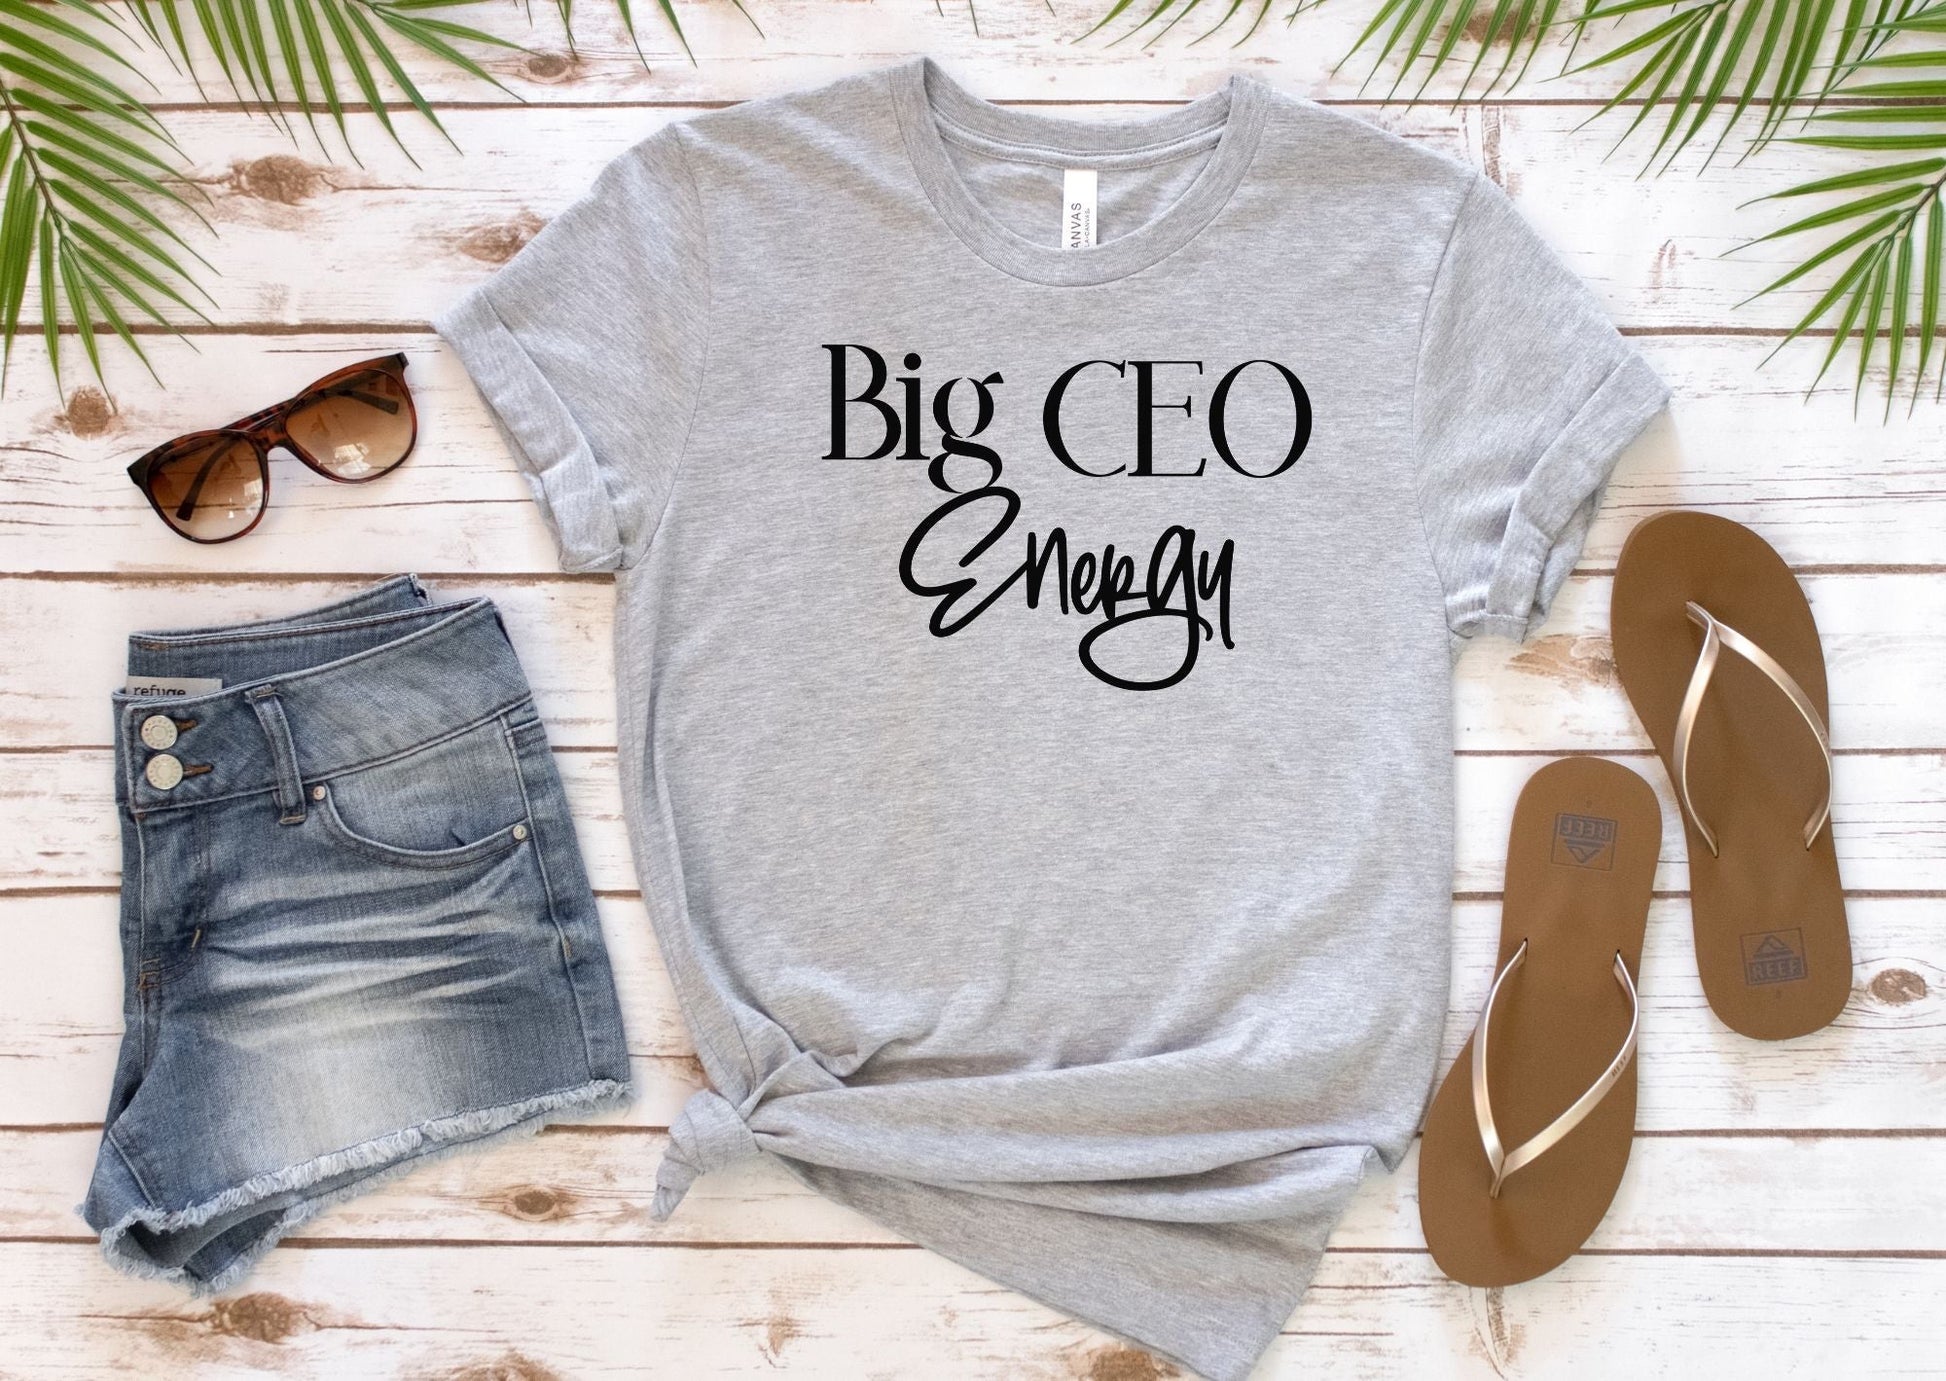 Big CEO Energy Shirt Black ; Small Business Owner Gift; Entrepreneur Heather Grey